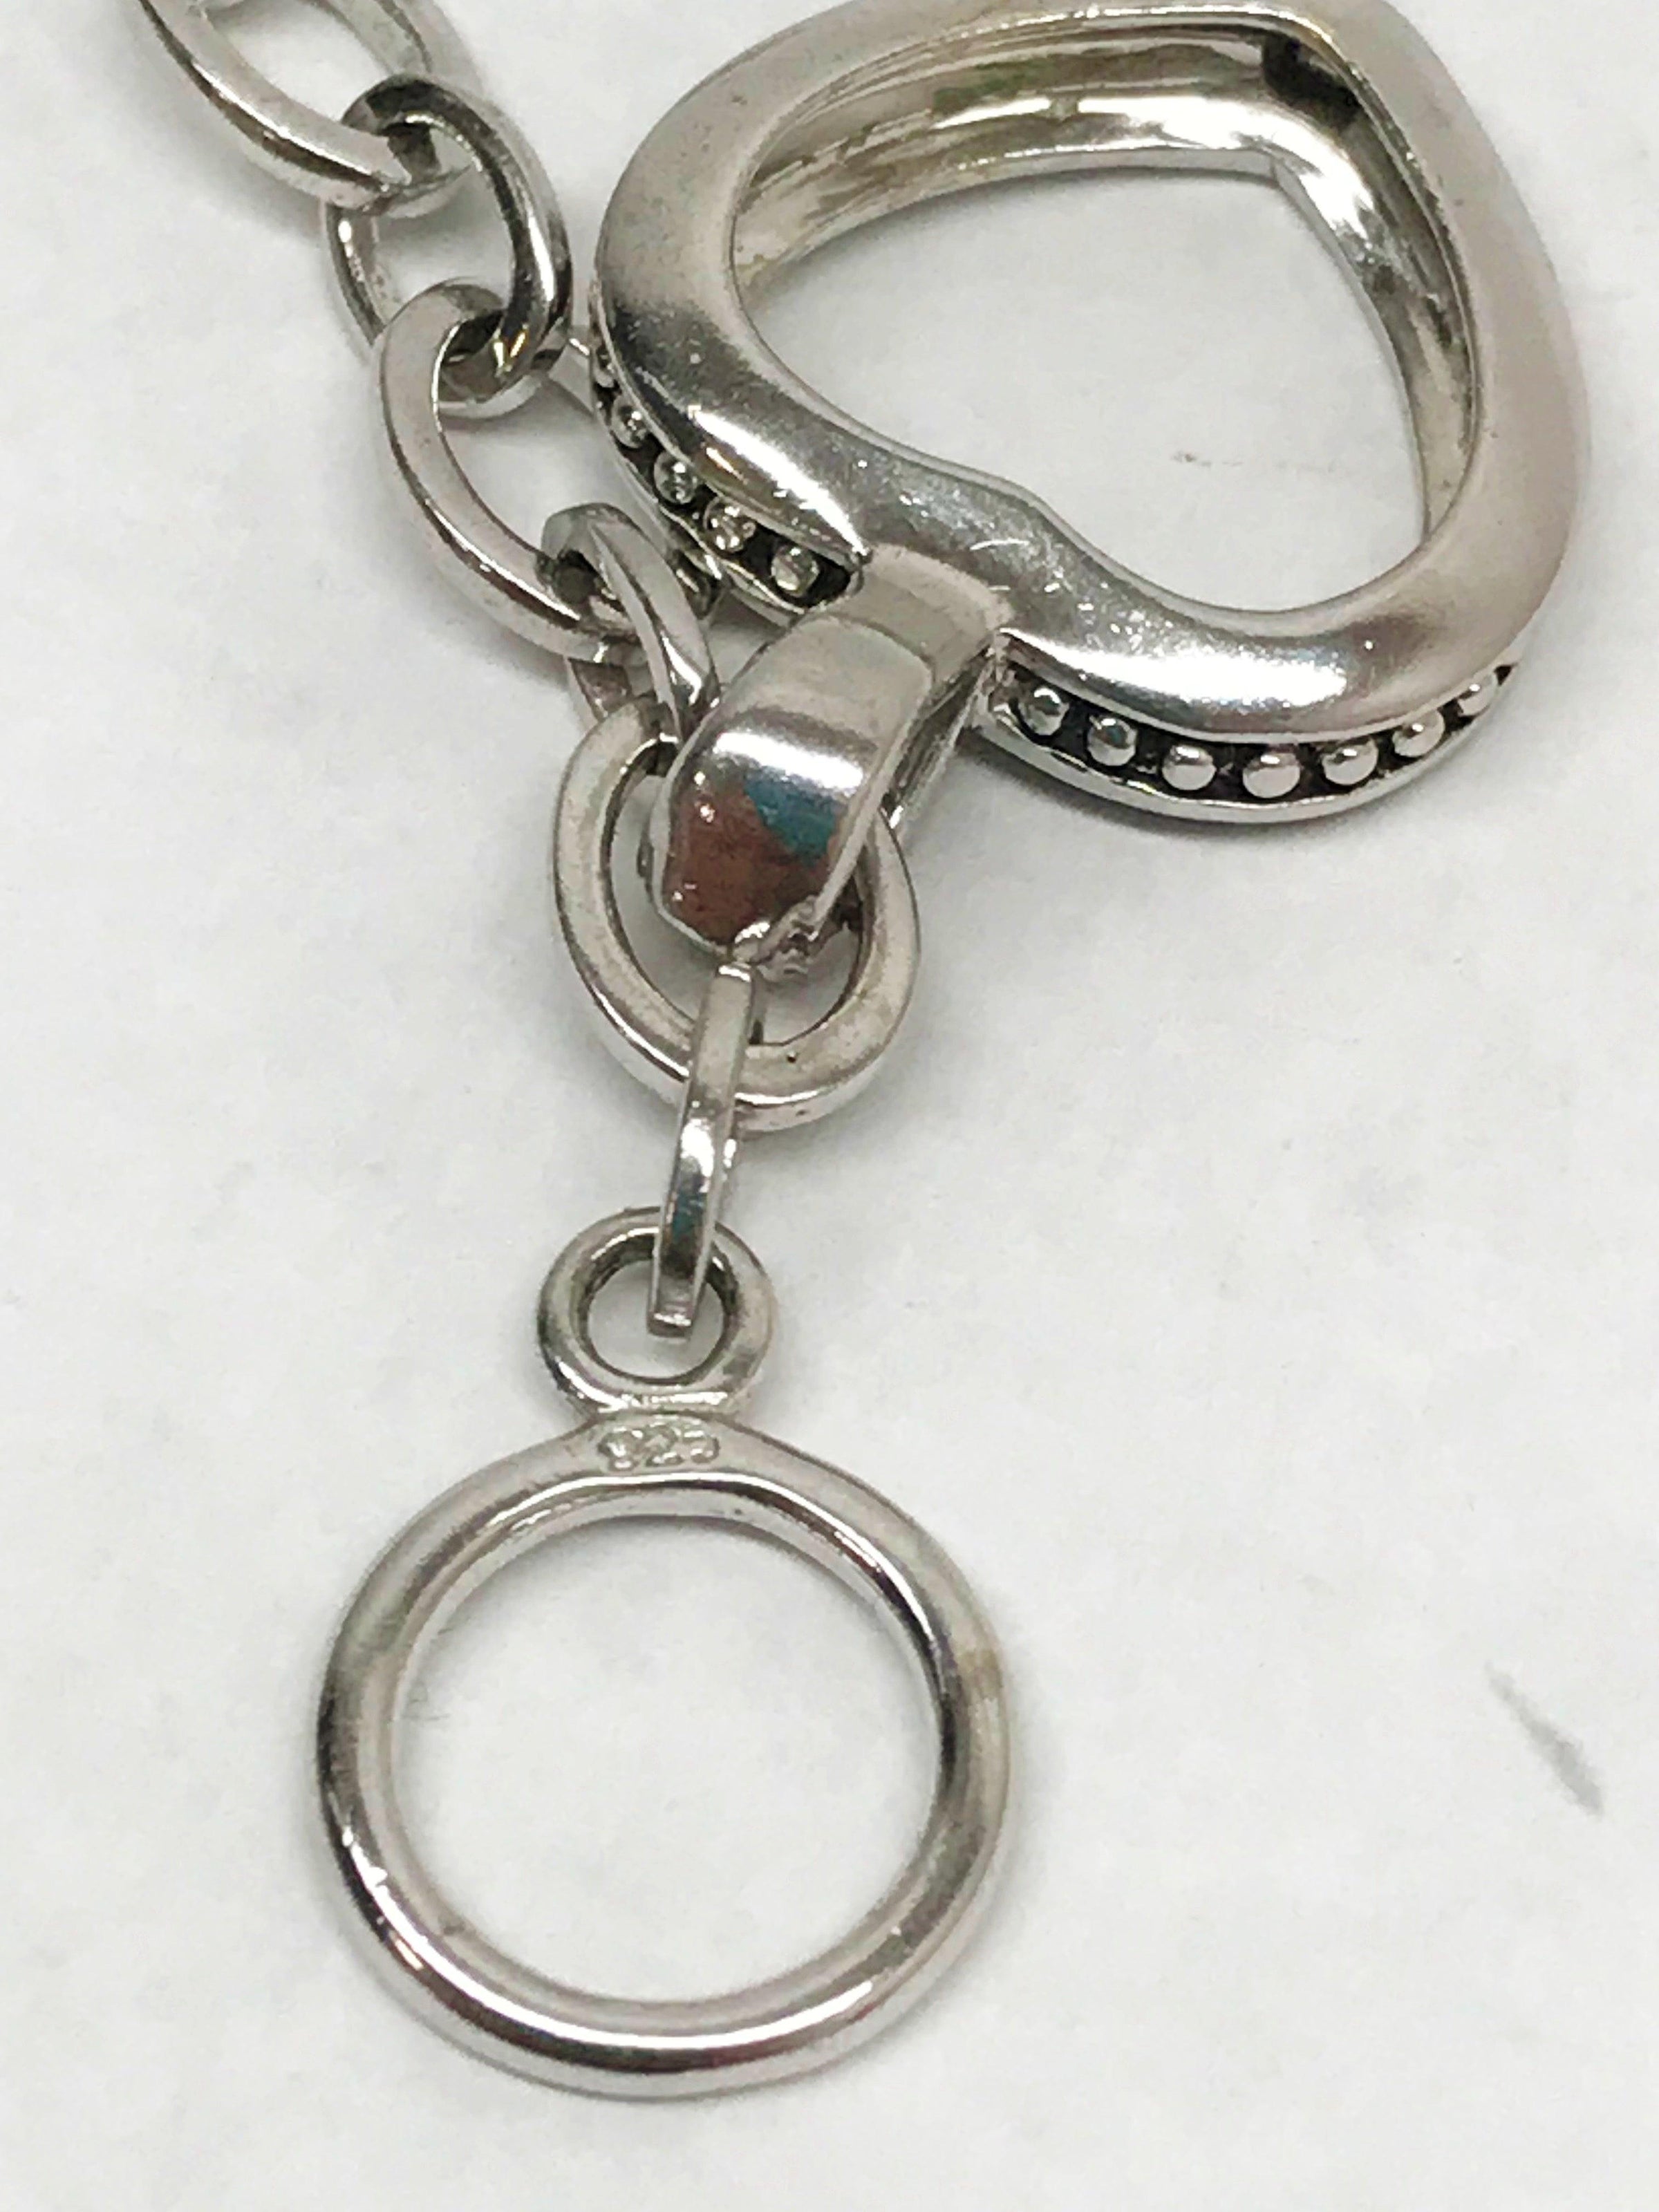 Sterling Silver Chain Link Bracelet With Open Heart Marcasite Charm - Hers and His Treasures